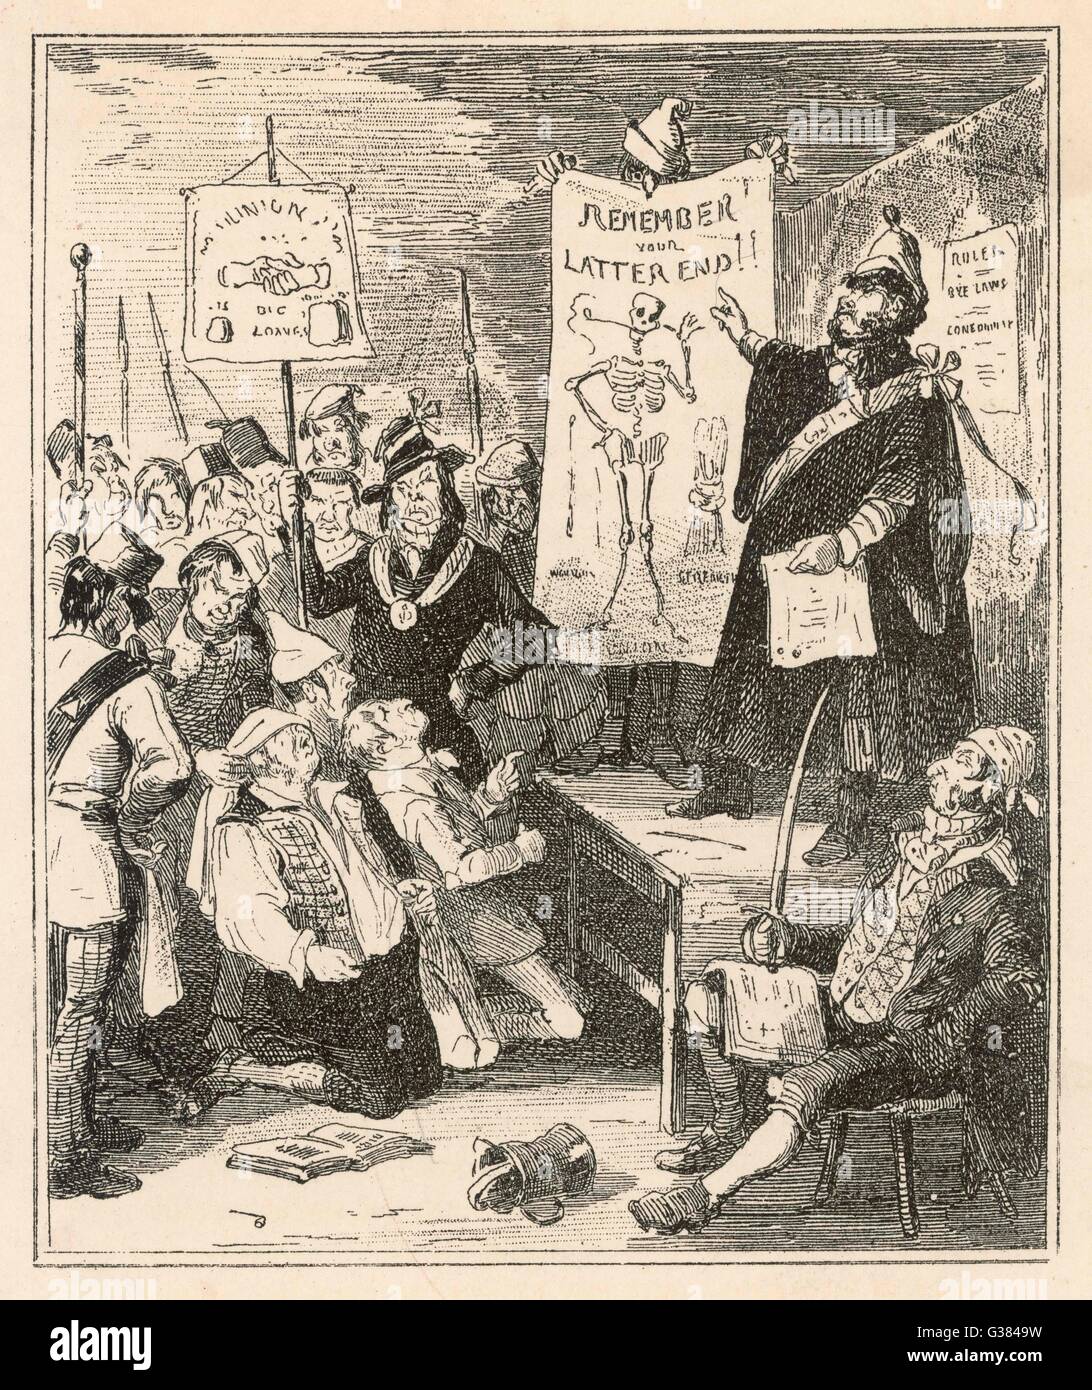 Initiation into a TRADE UNION  - due to official hostility  (unionists were perceived as  revolutionaries) the earliest  unions conducted themselves  like secret societies     Date: circa 1835 Stock Photo